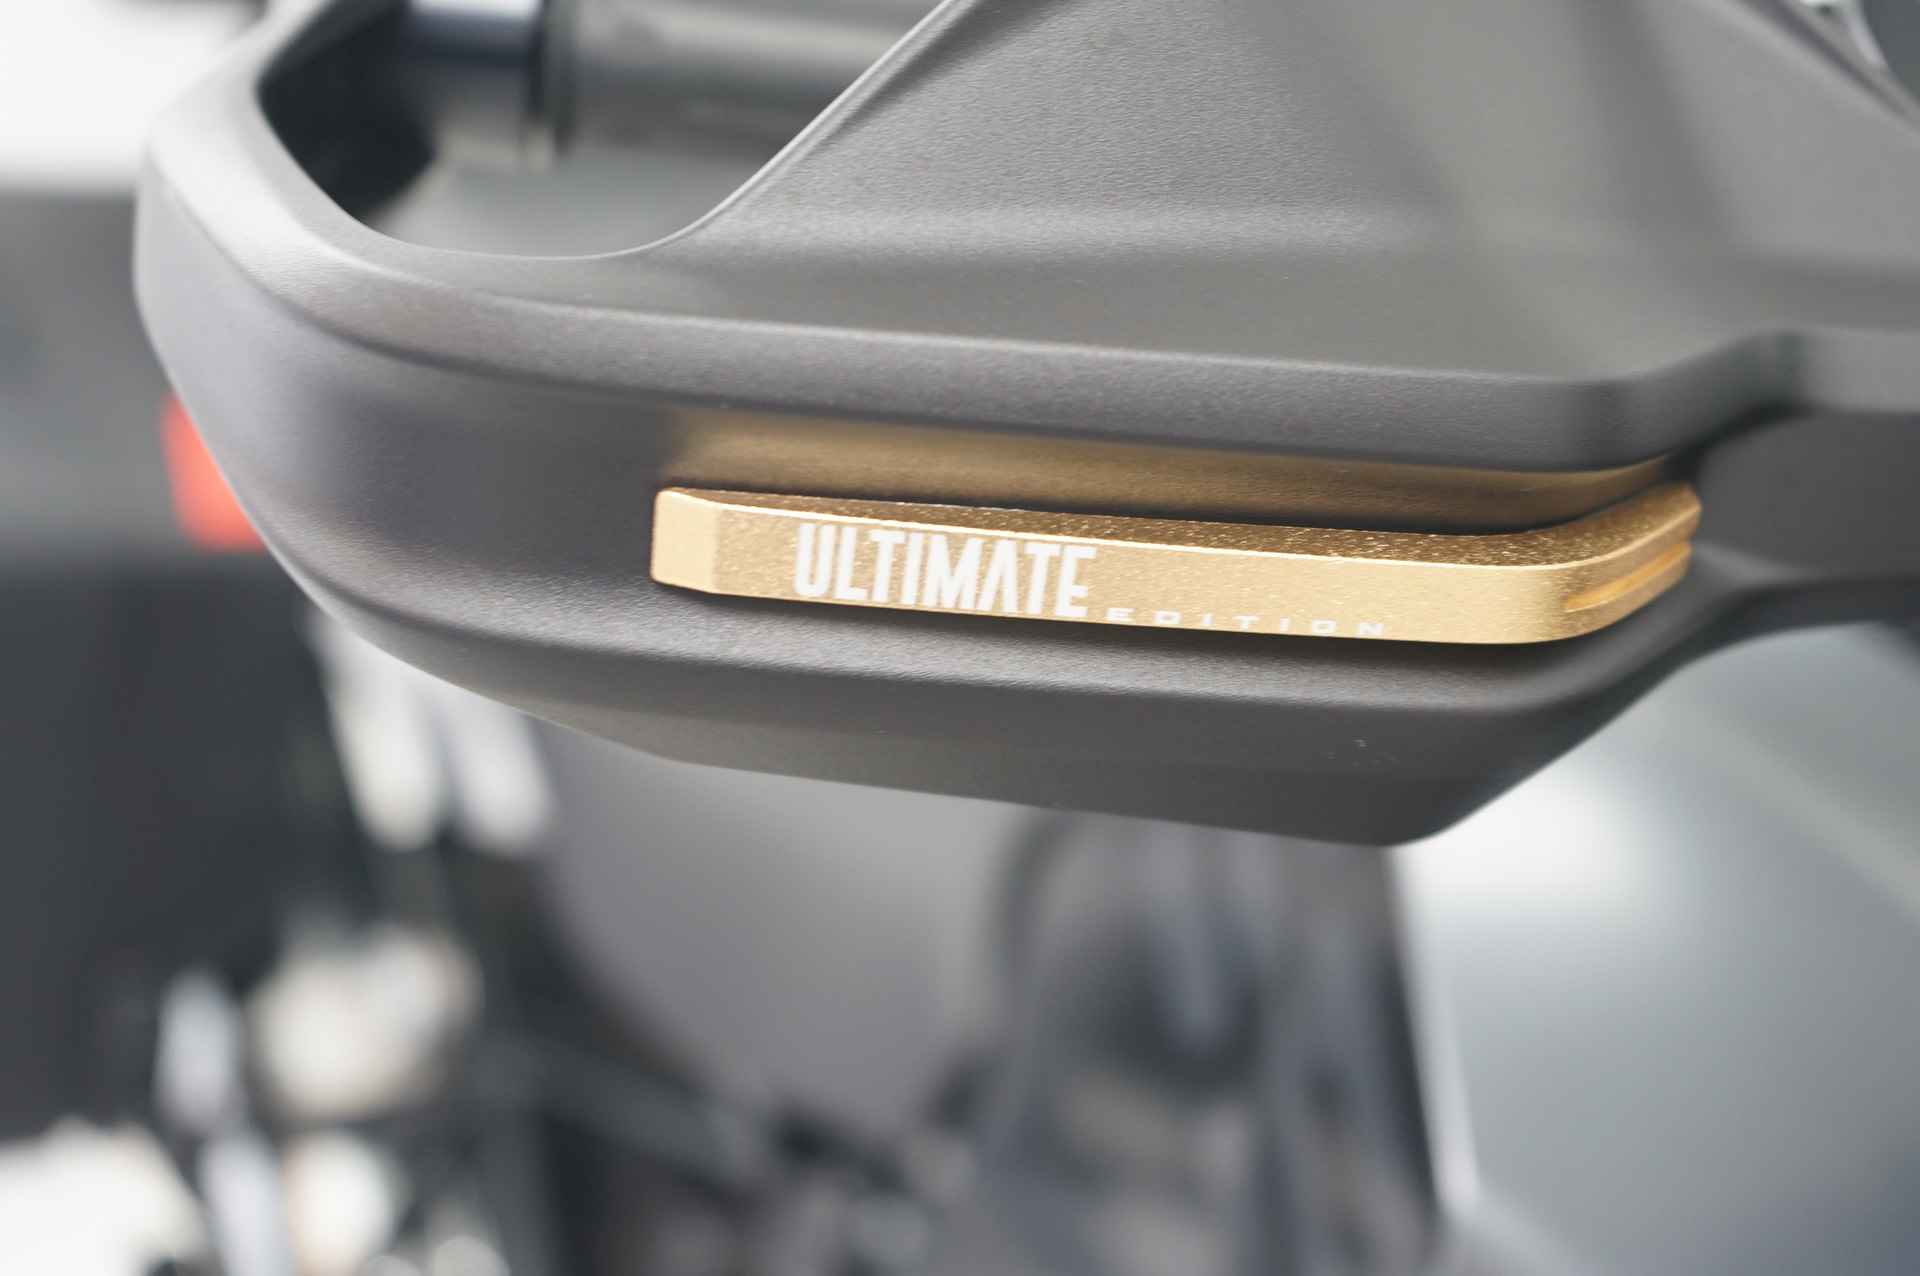 BMW R 1250GS ULTIMADE EDITION - 10/16